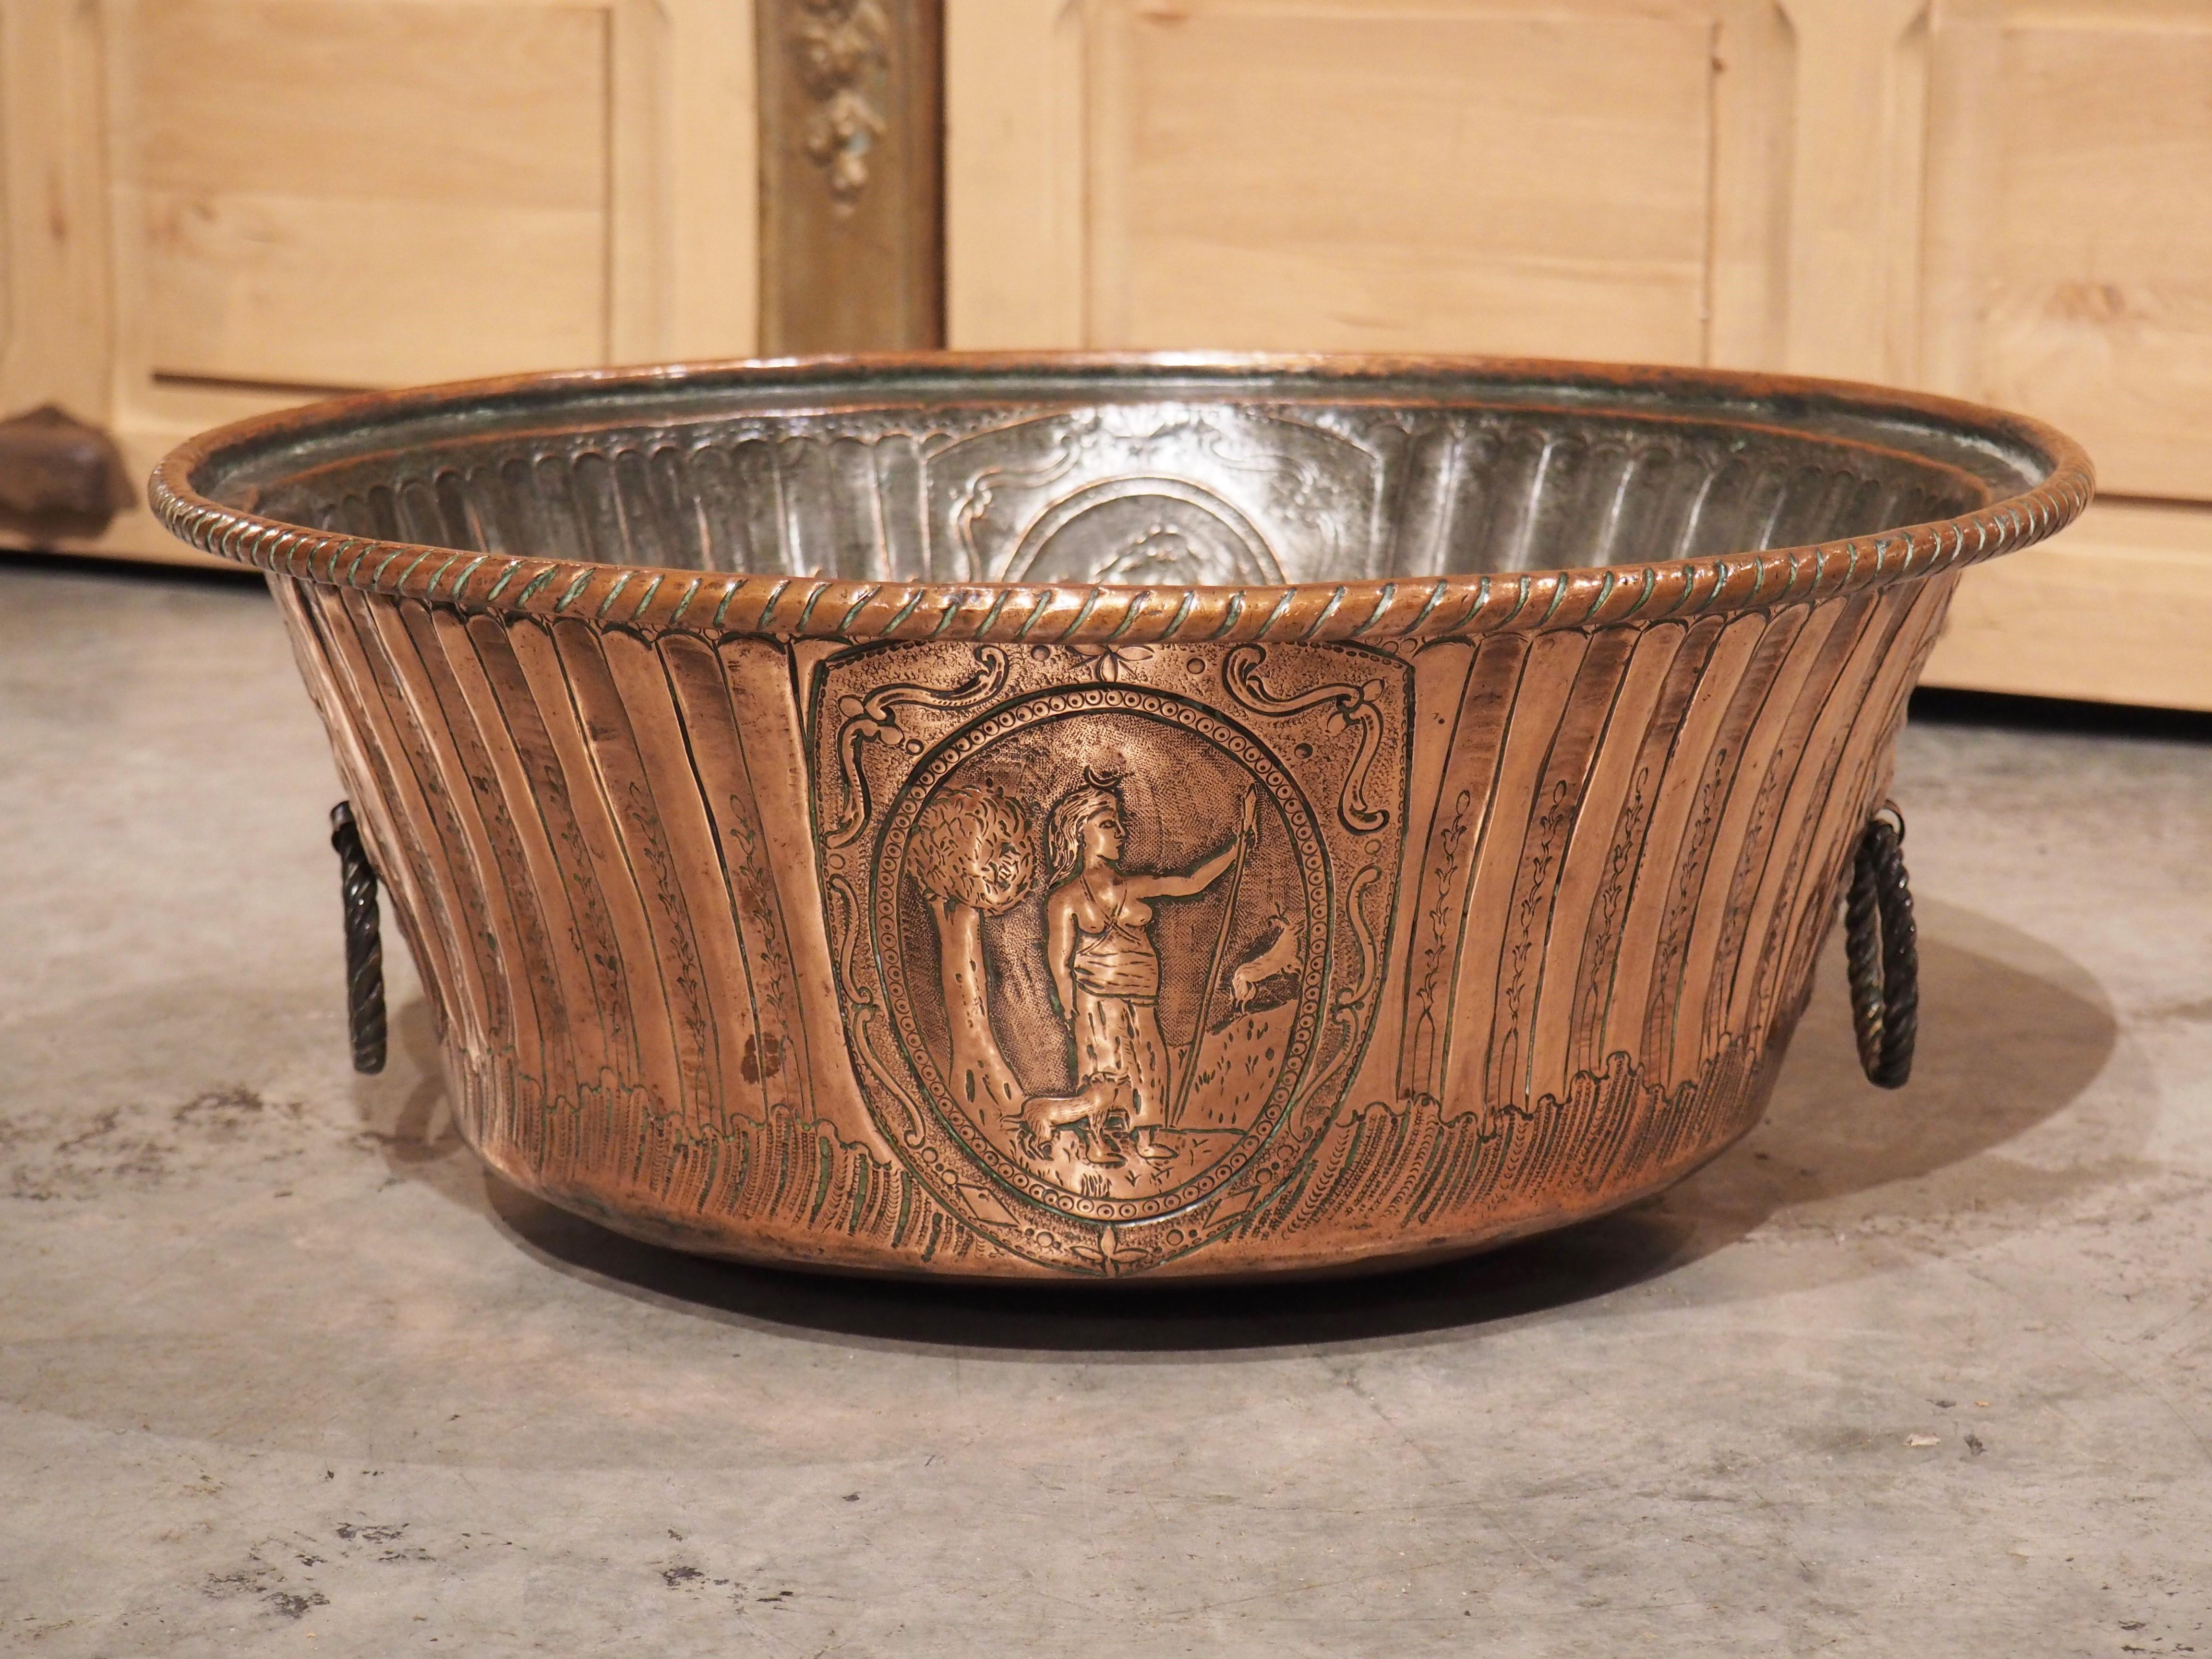 A beautiful example of a period Louis XVI chaudron, or cauldron, the copper has been decorated with a metalworking technique known as repousse, where low relief motifs are hammered from the reverse side. Many motifs from Louis XVI were inspired by